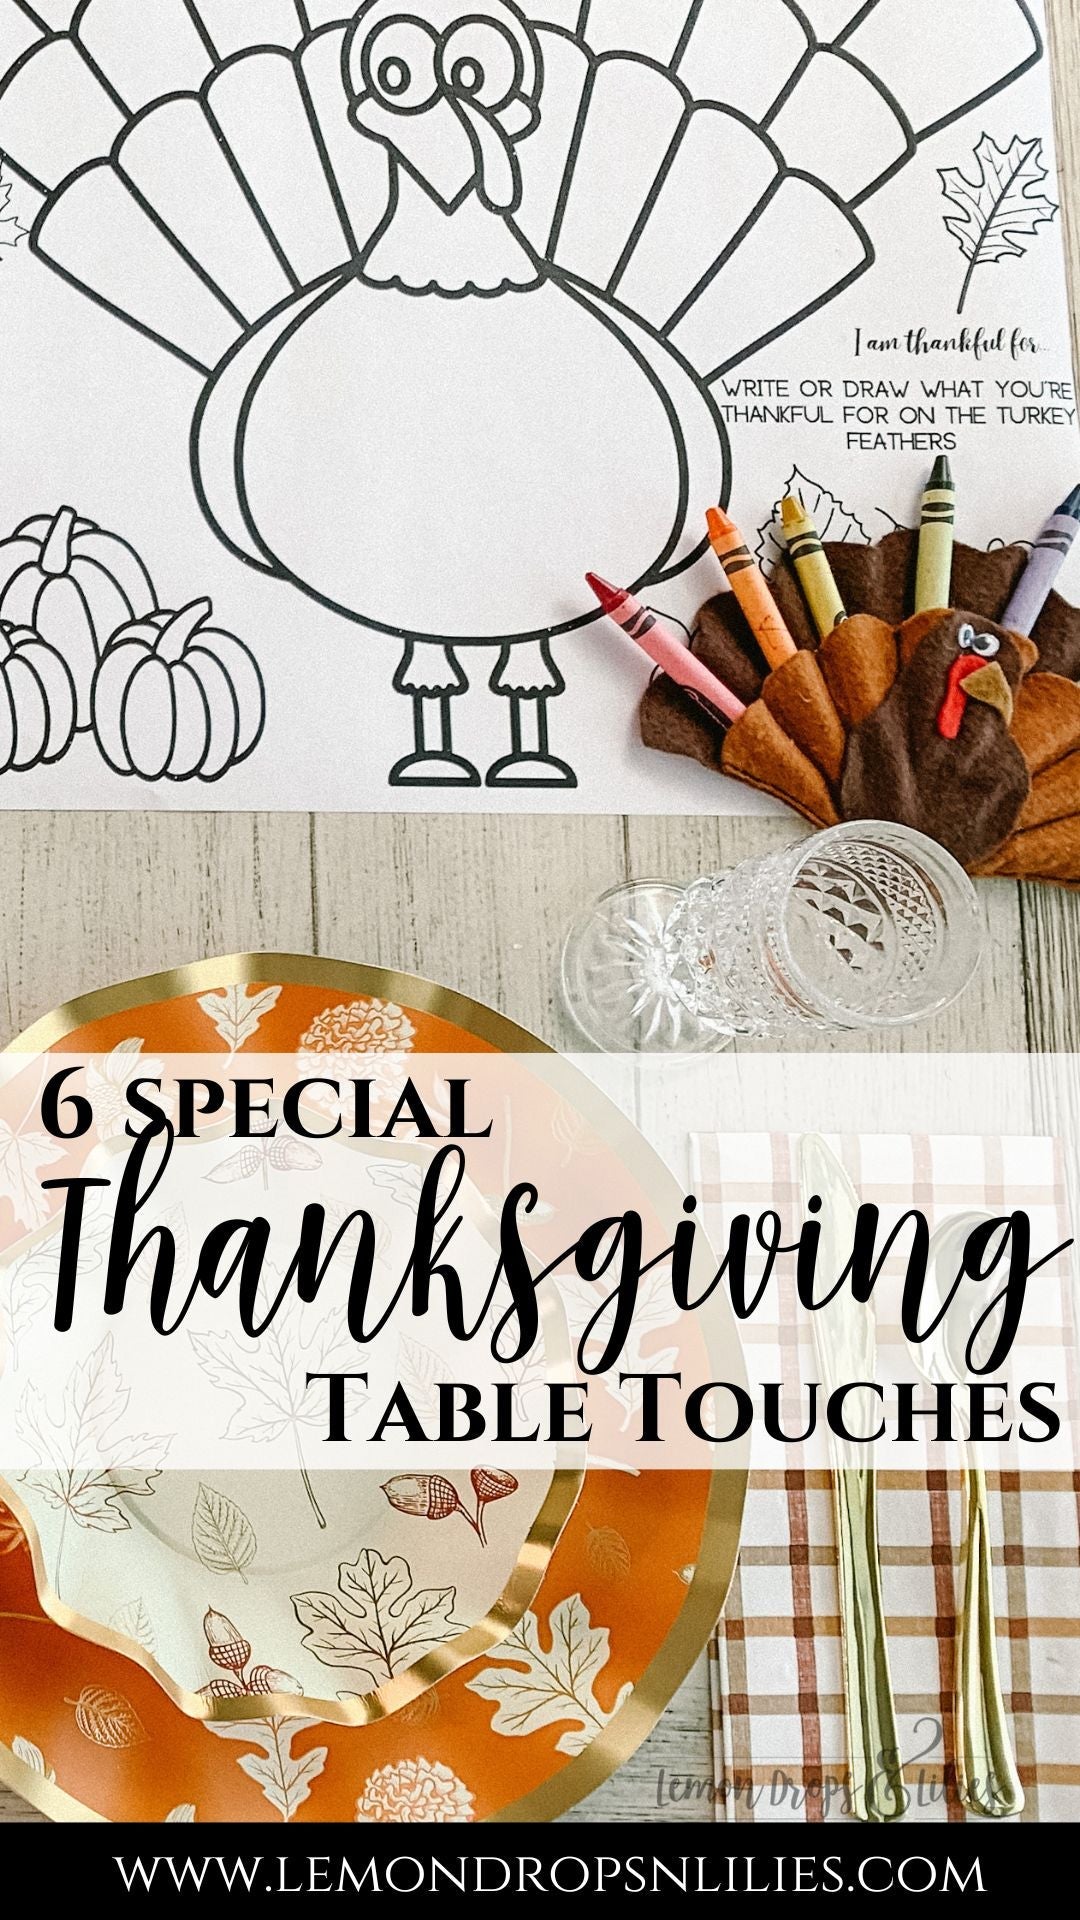 6 Small Touches to Make Your Thanksgiving Table Special + FREE PRINTAB ...